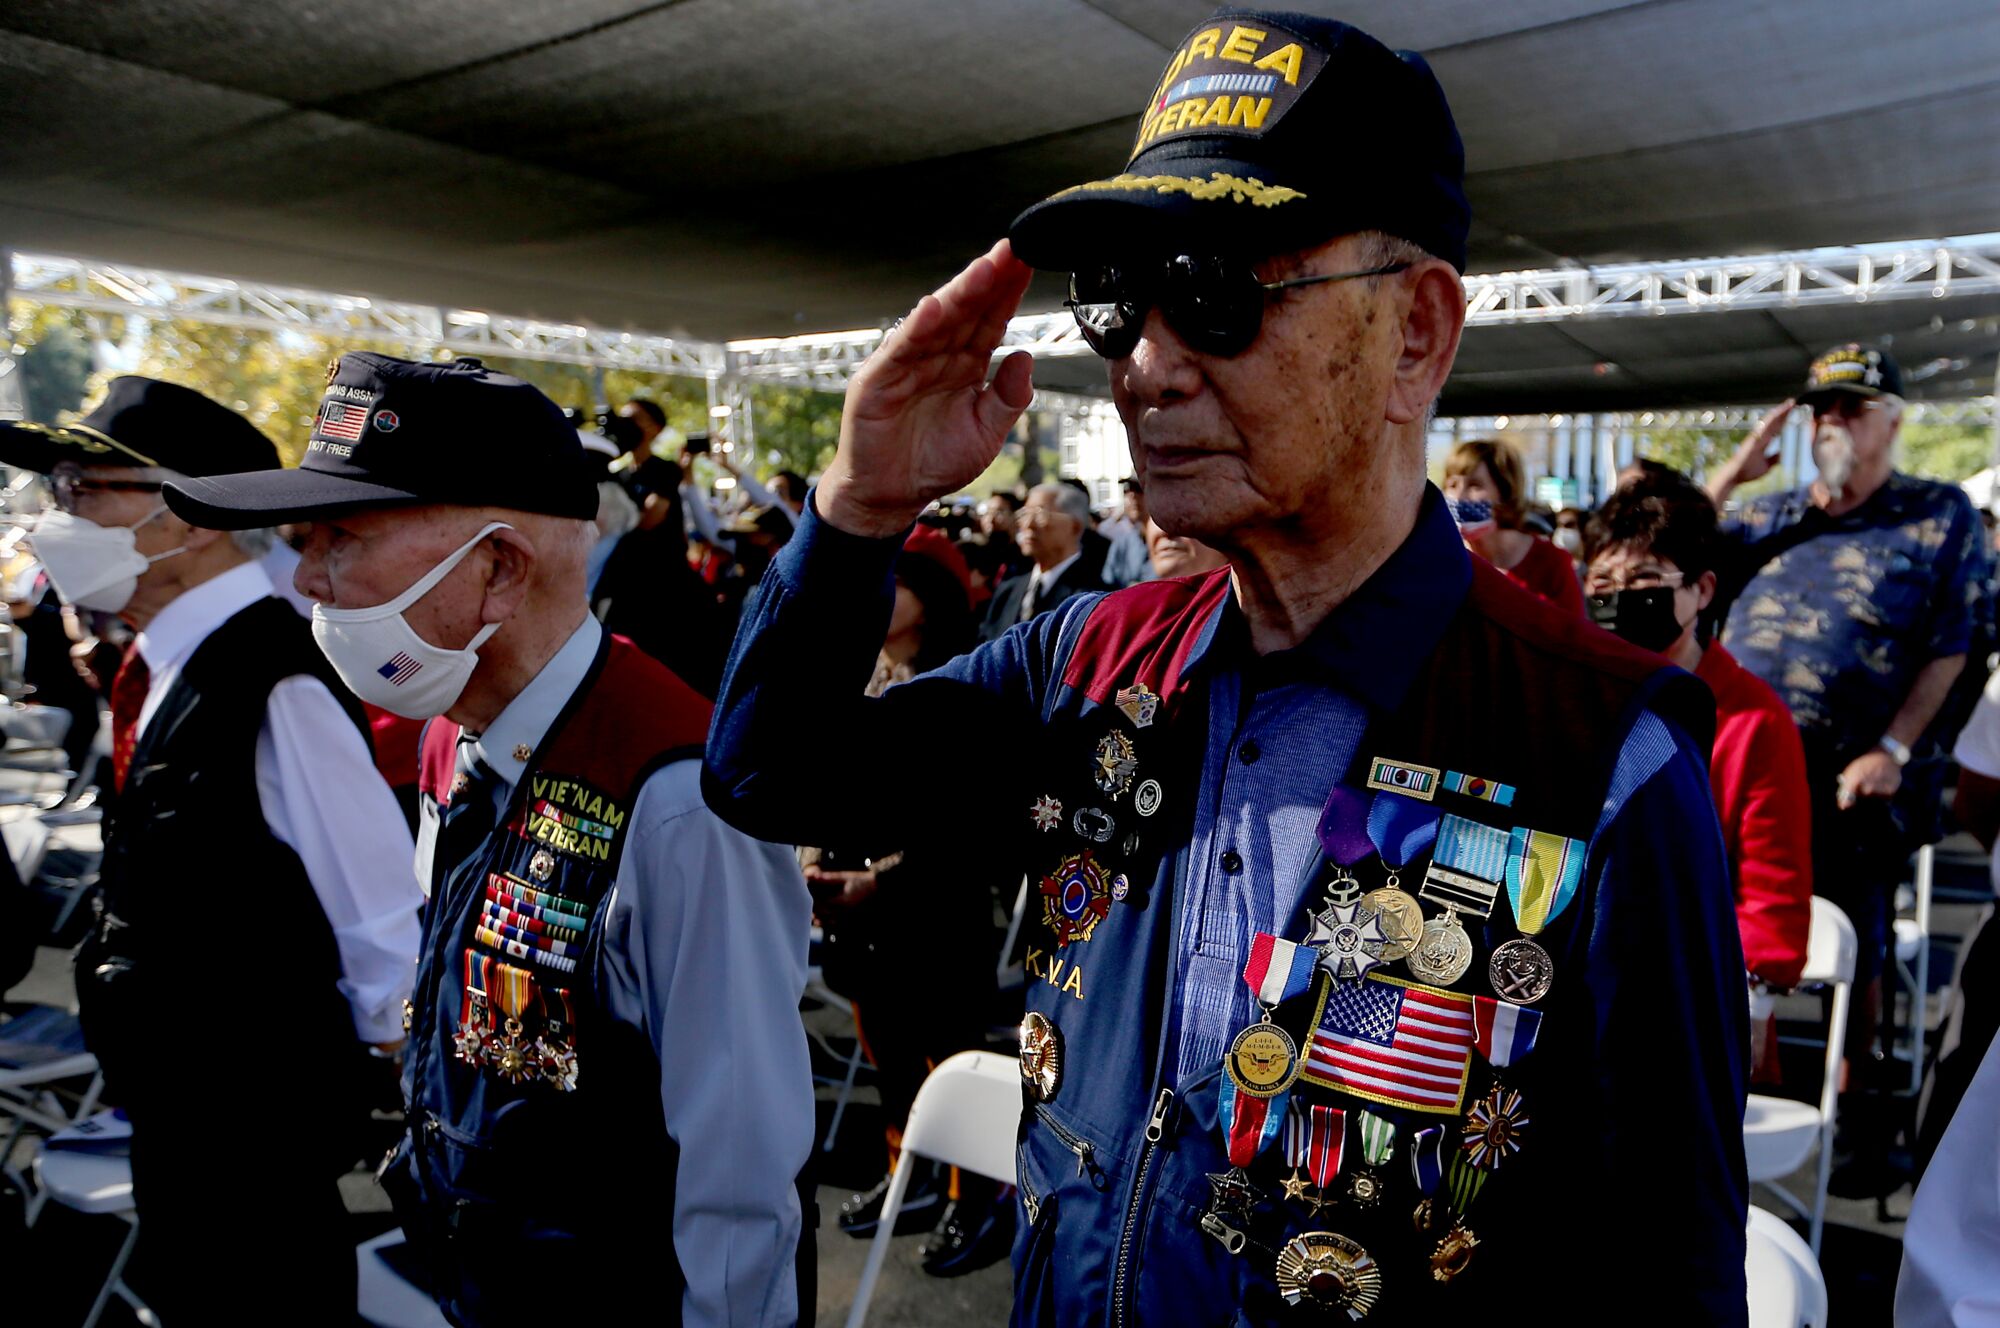 An elderly man wearing several military medals and pins salutes